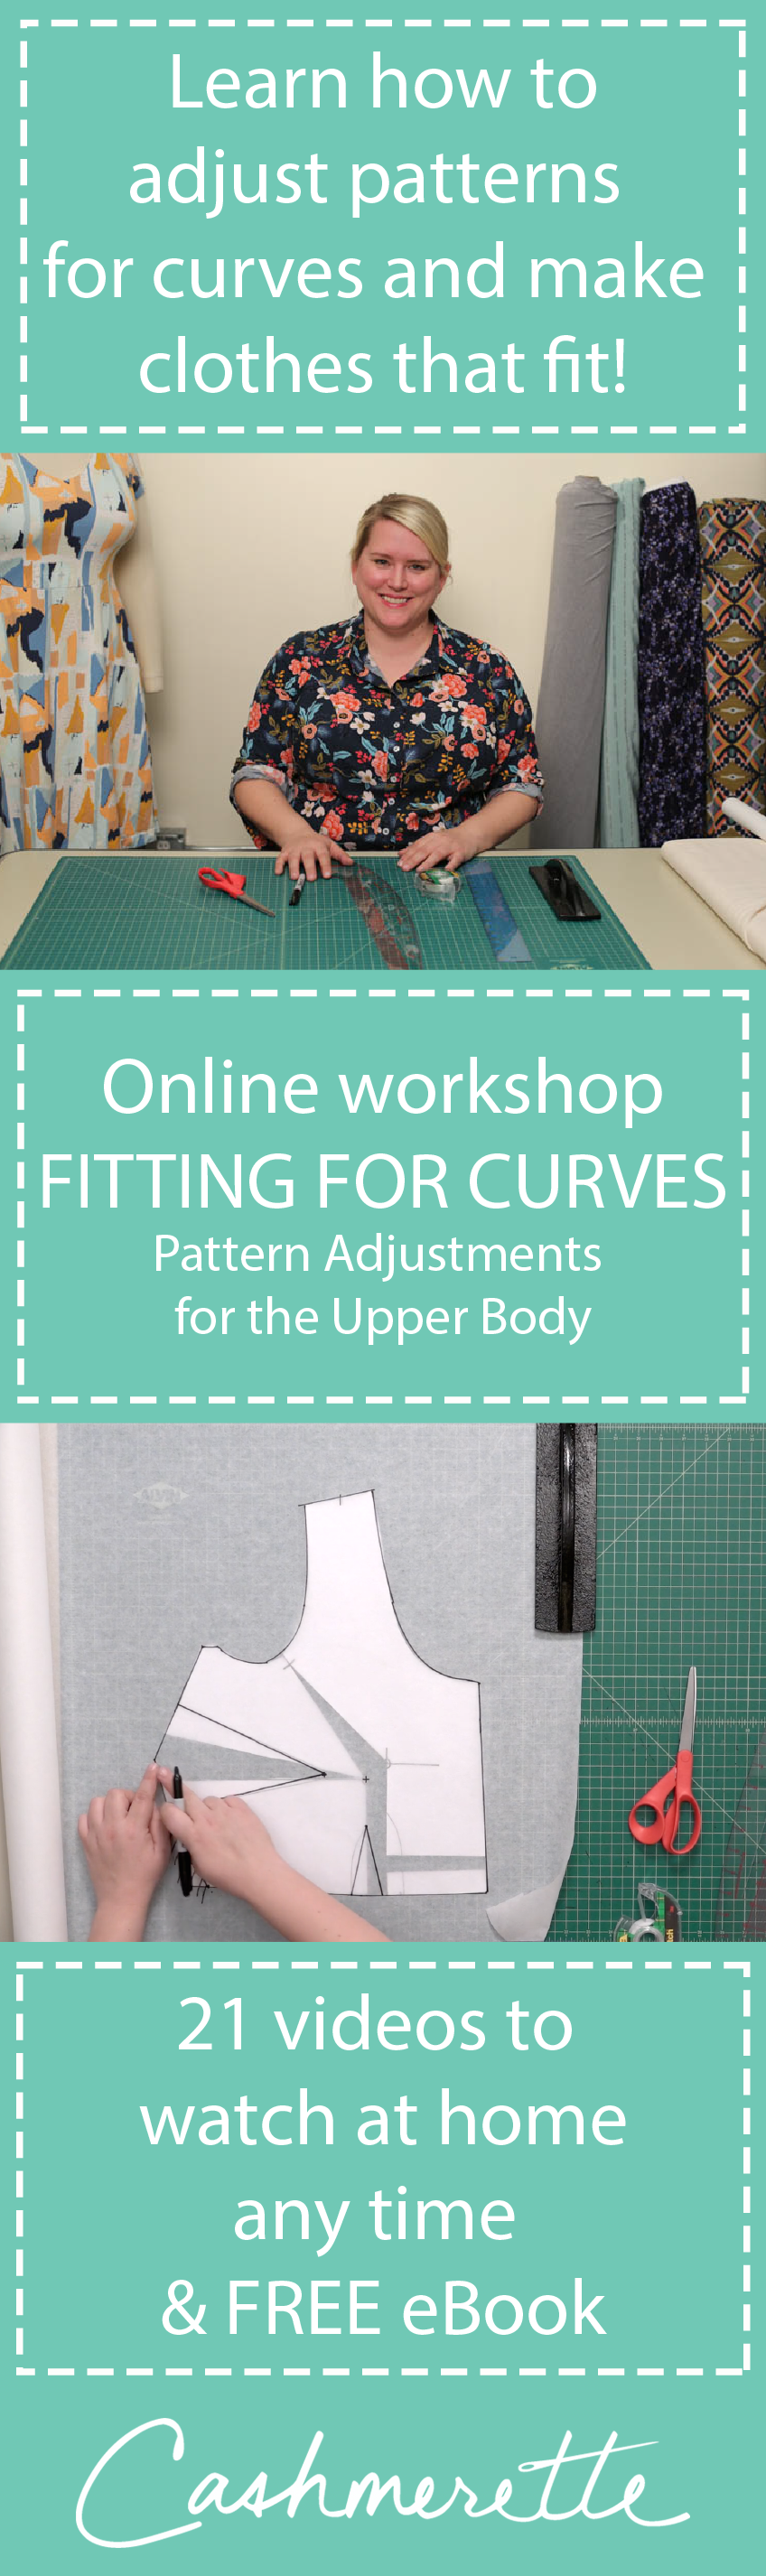 Fitting for Curves: a new online workshop that teaches you how to alter sewing patterns for curves